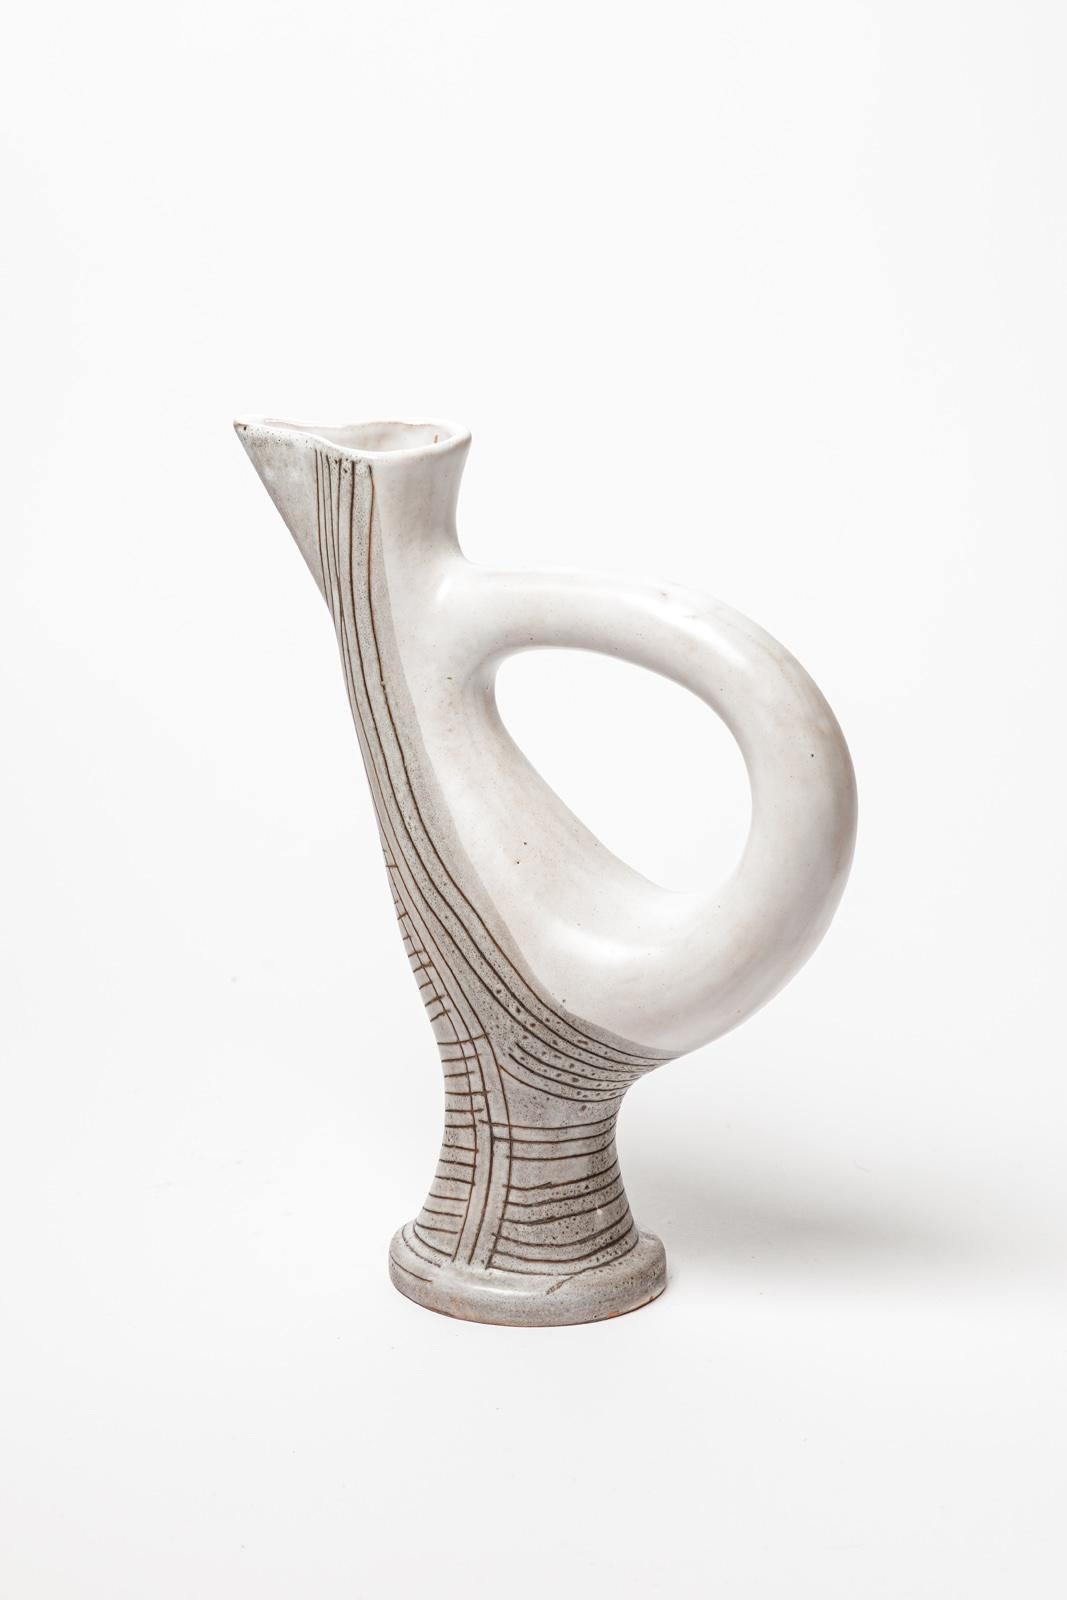 Jean Austruy Large White and Grey Free Form Ceramic Pitcher, circa 1960 In Excellent Condition For Sale In Neuilly-en- sancerre, FR